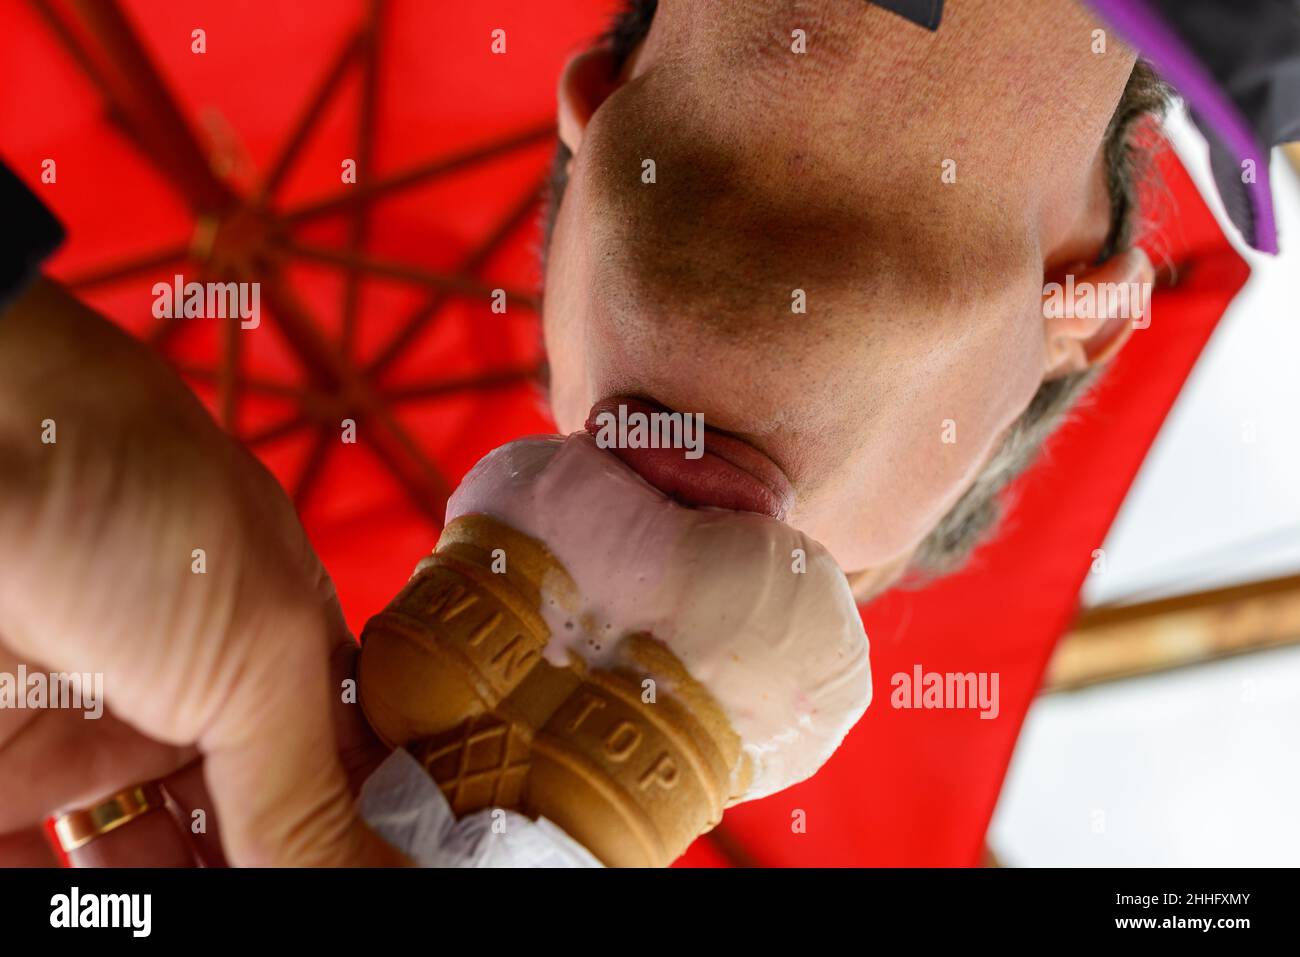 Eating an ice cream cone, view from below, underneath, looking up Stock Photo